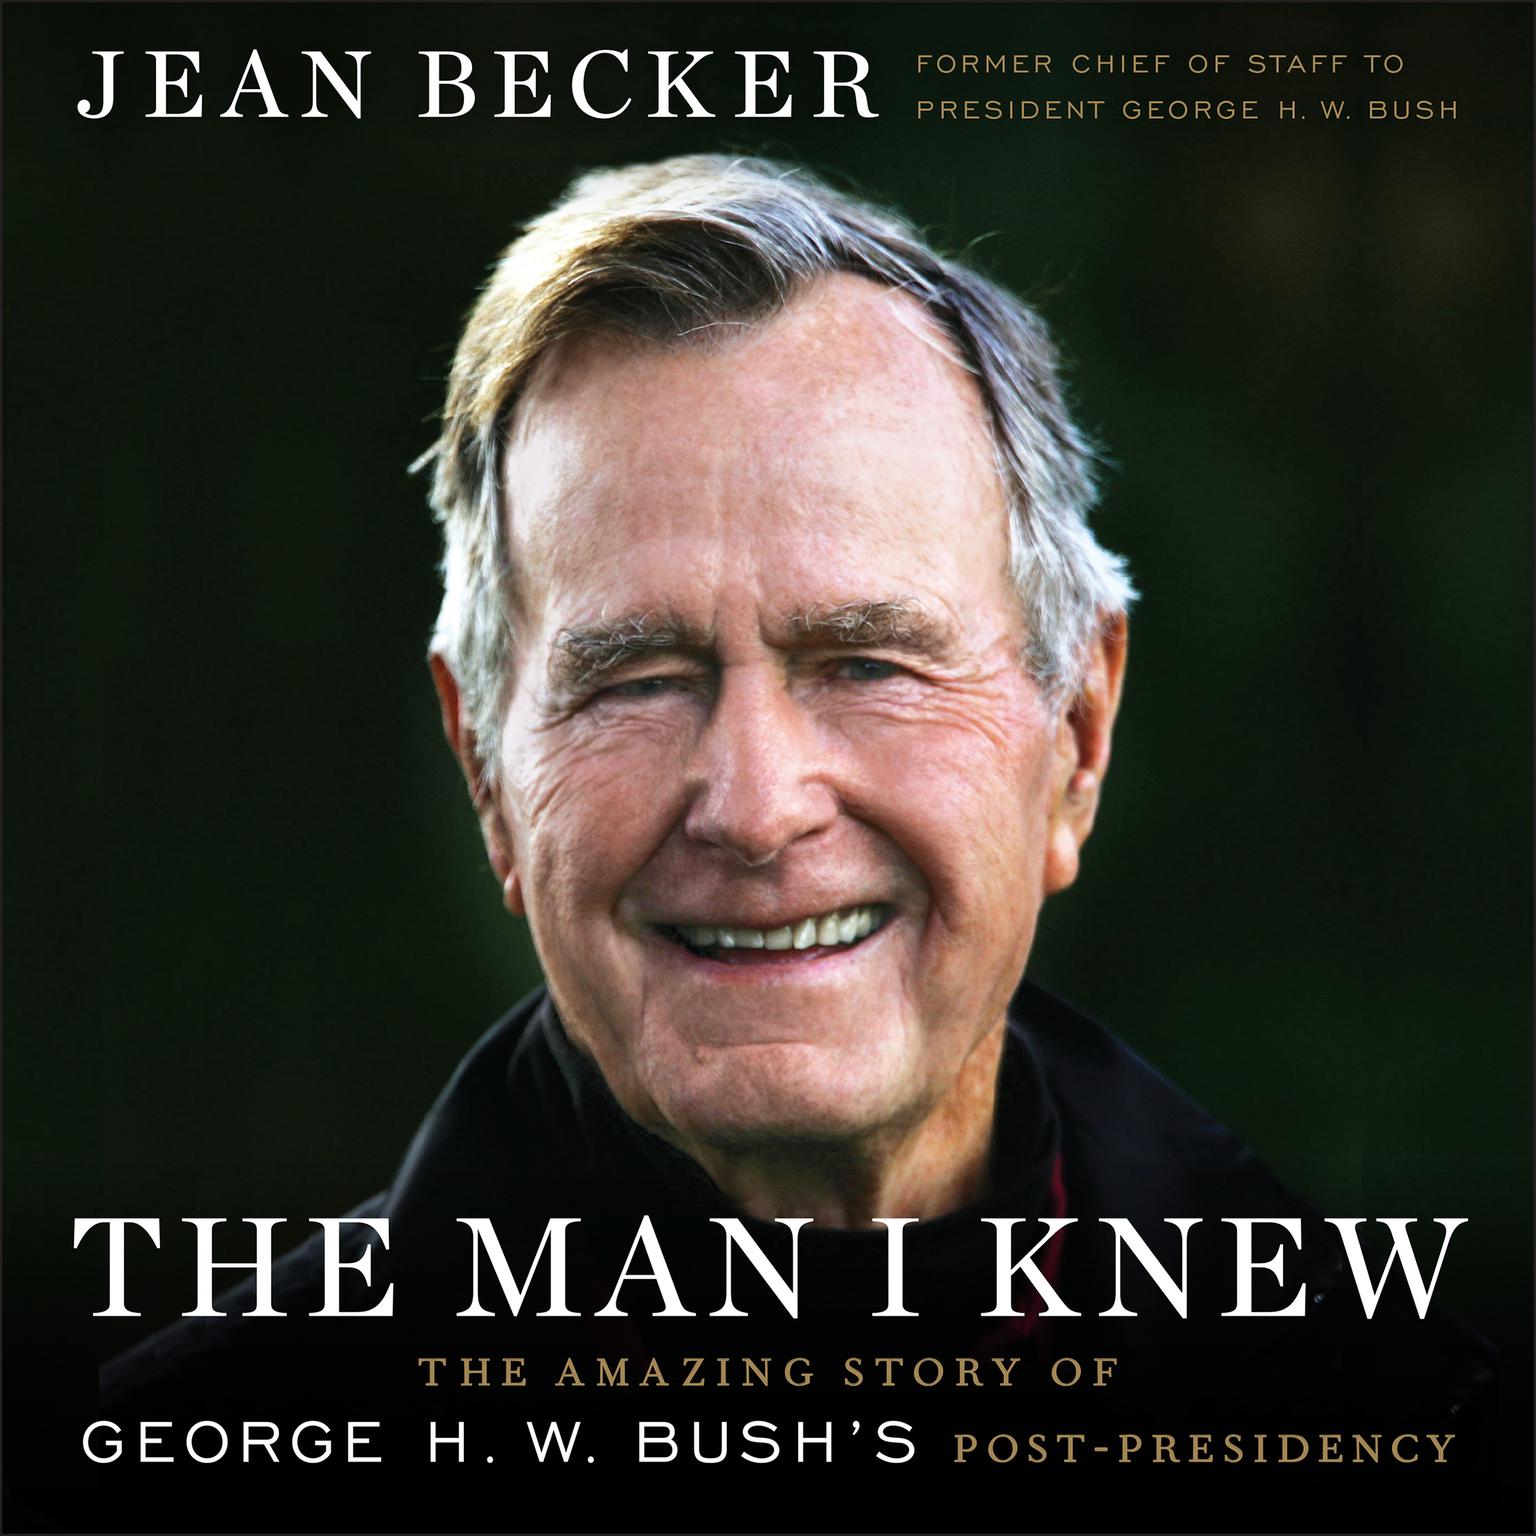 The Man I Knew: The Amazing Story of George H. W. Bushs Post-Presidency Audiobook, by Jean Becker